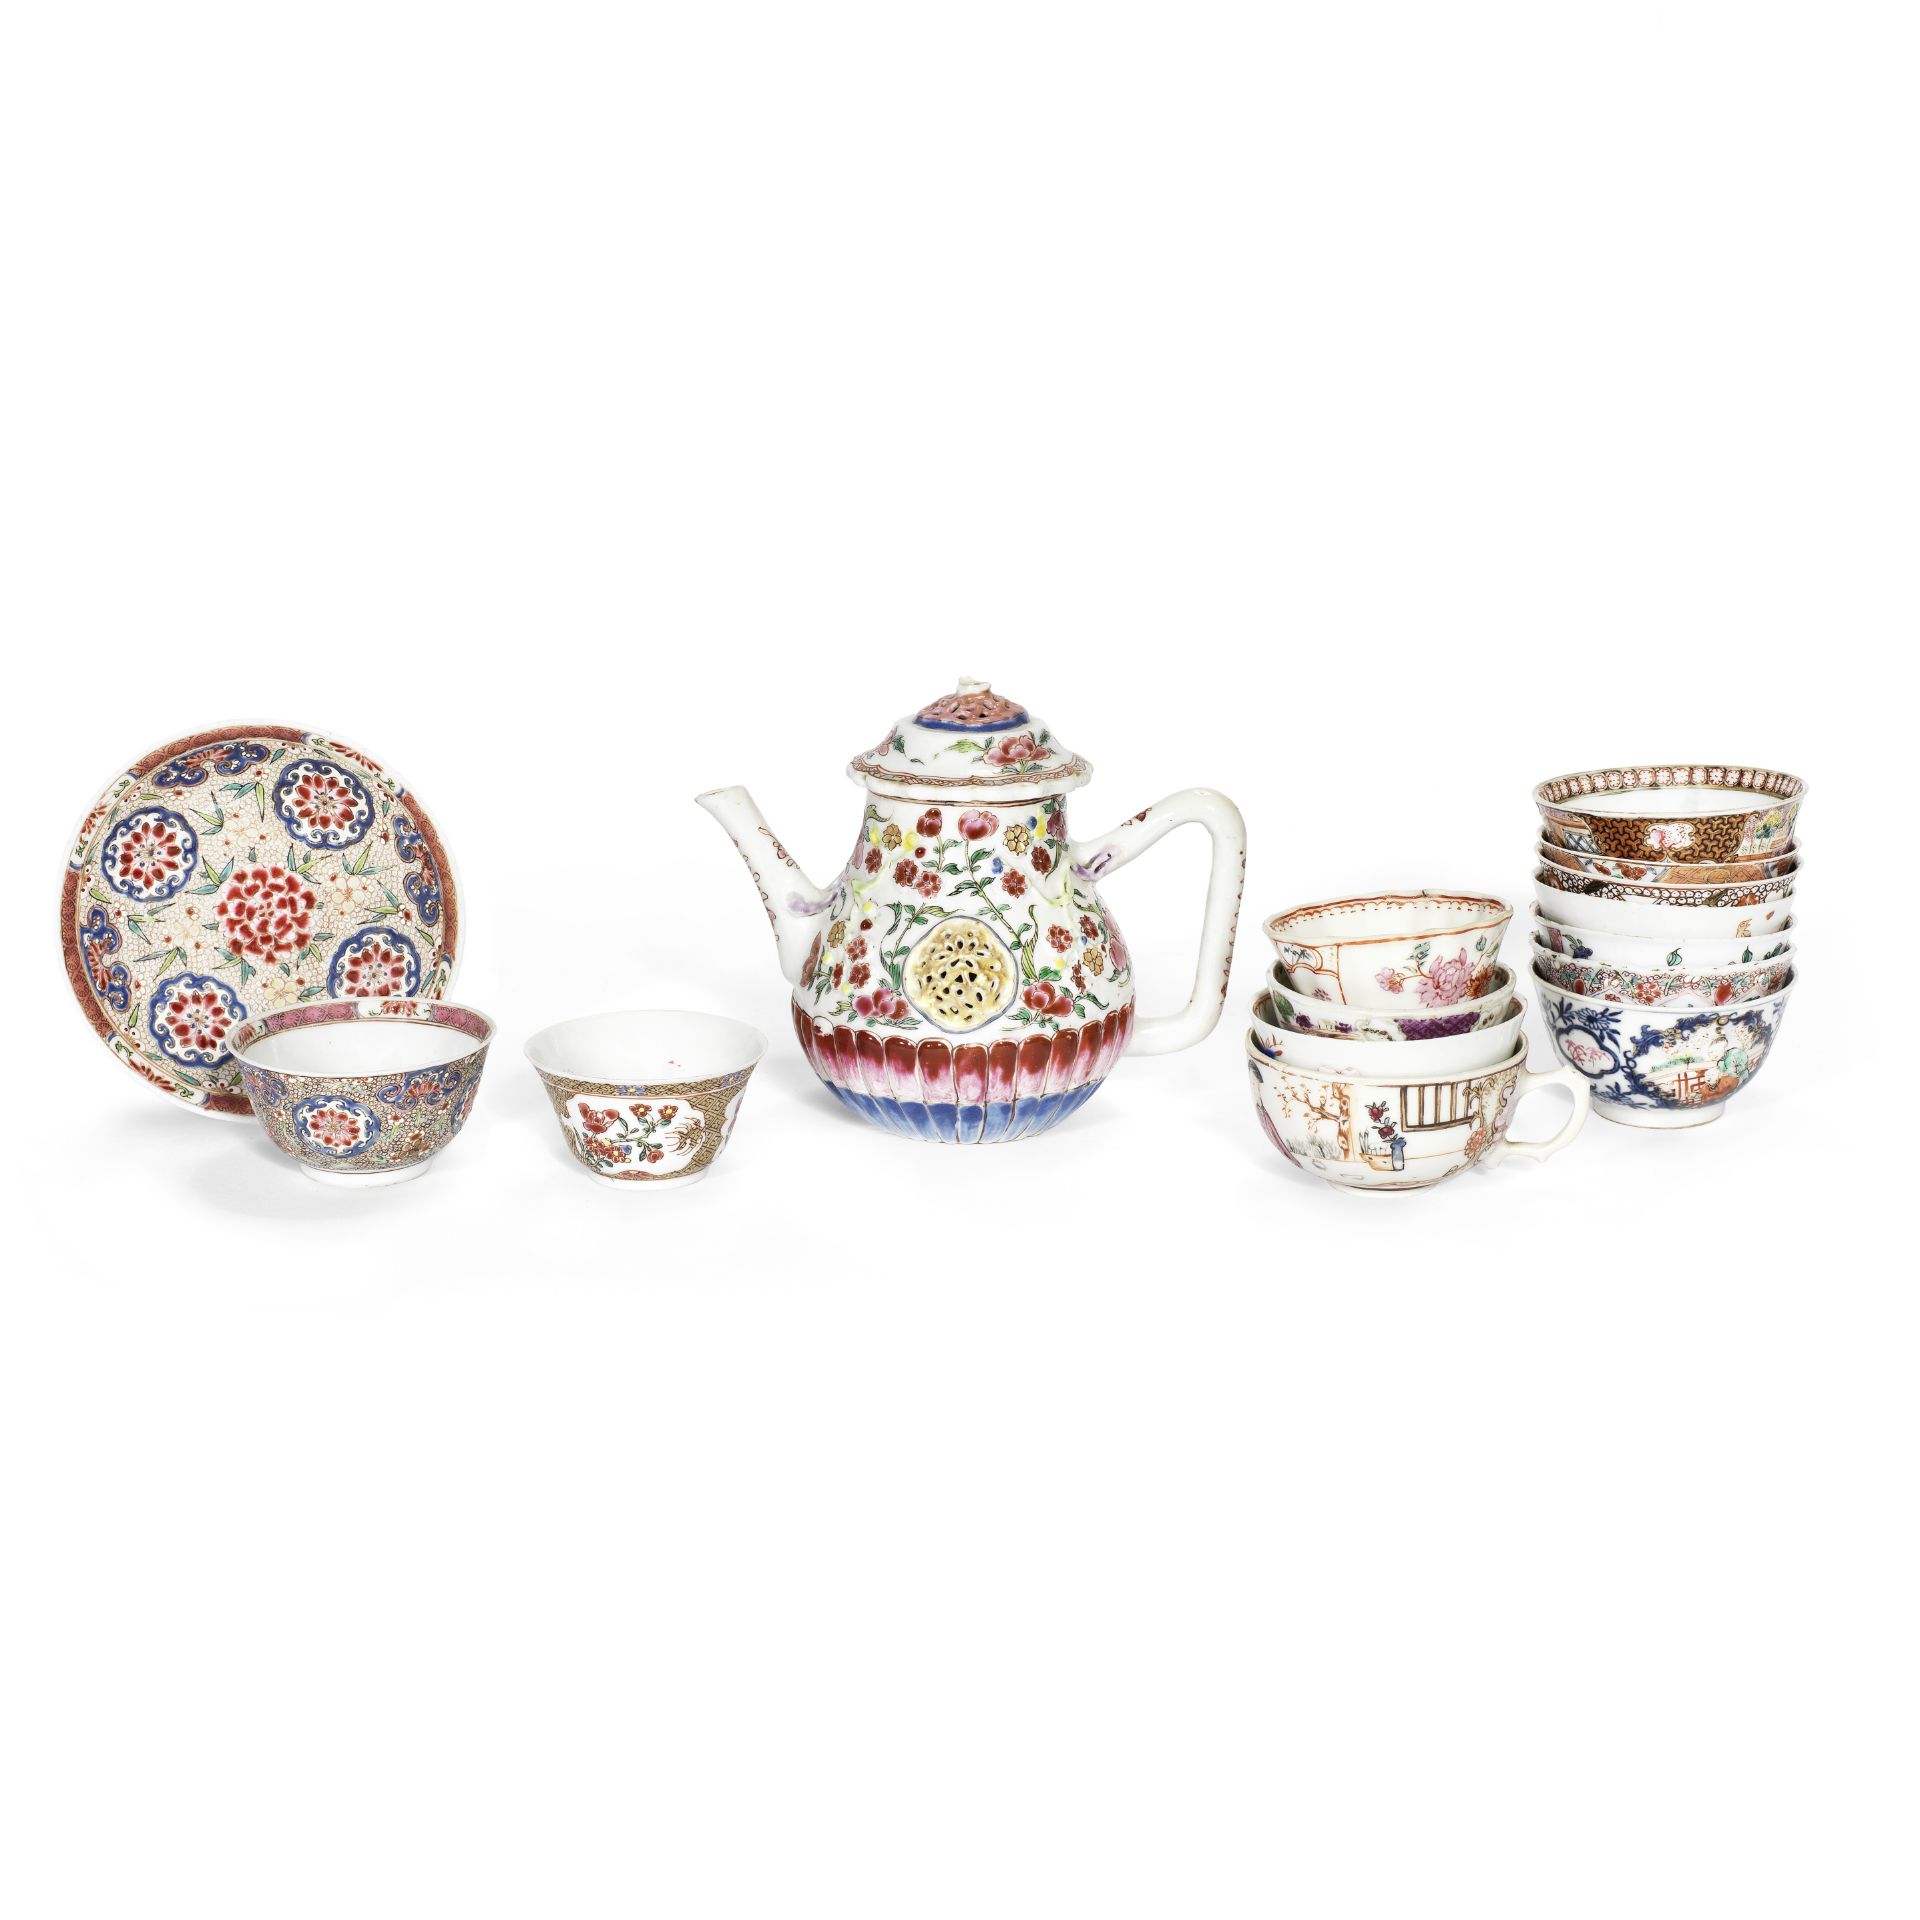 A GROUP OF FAMILLE ROSE EXPORT TEA WARES 18th century (16)